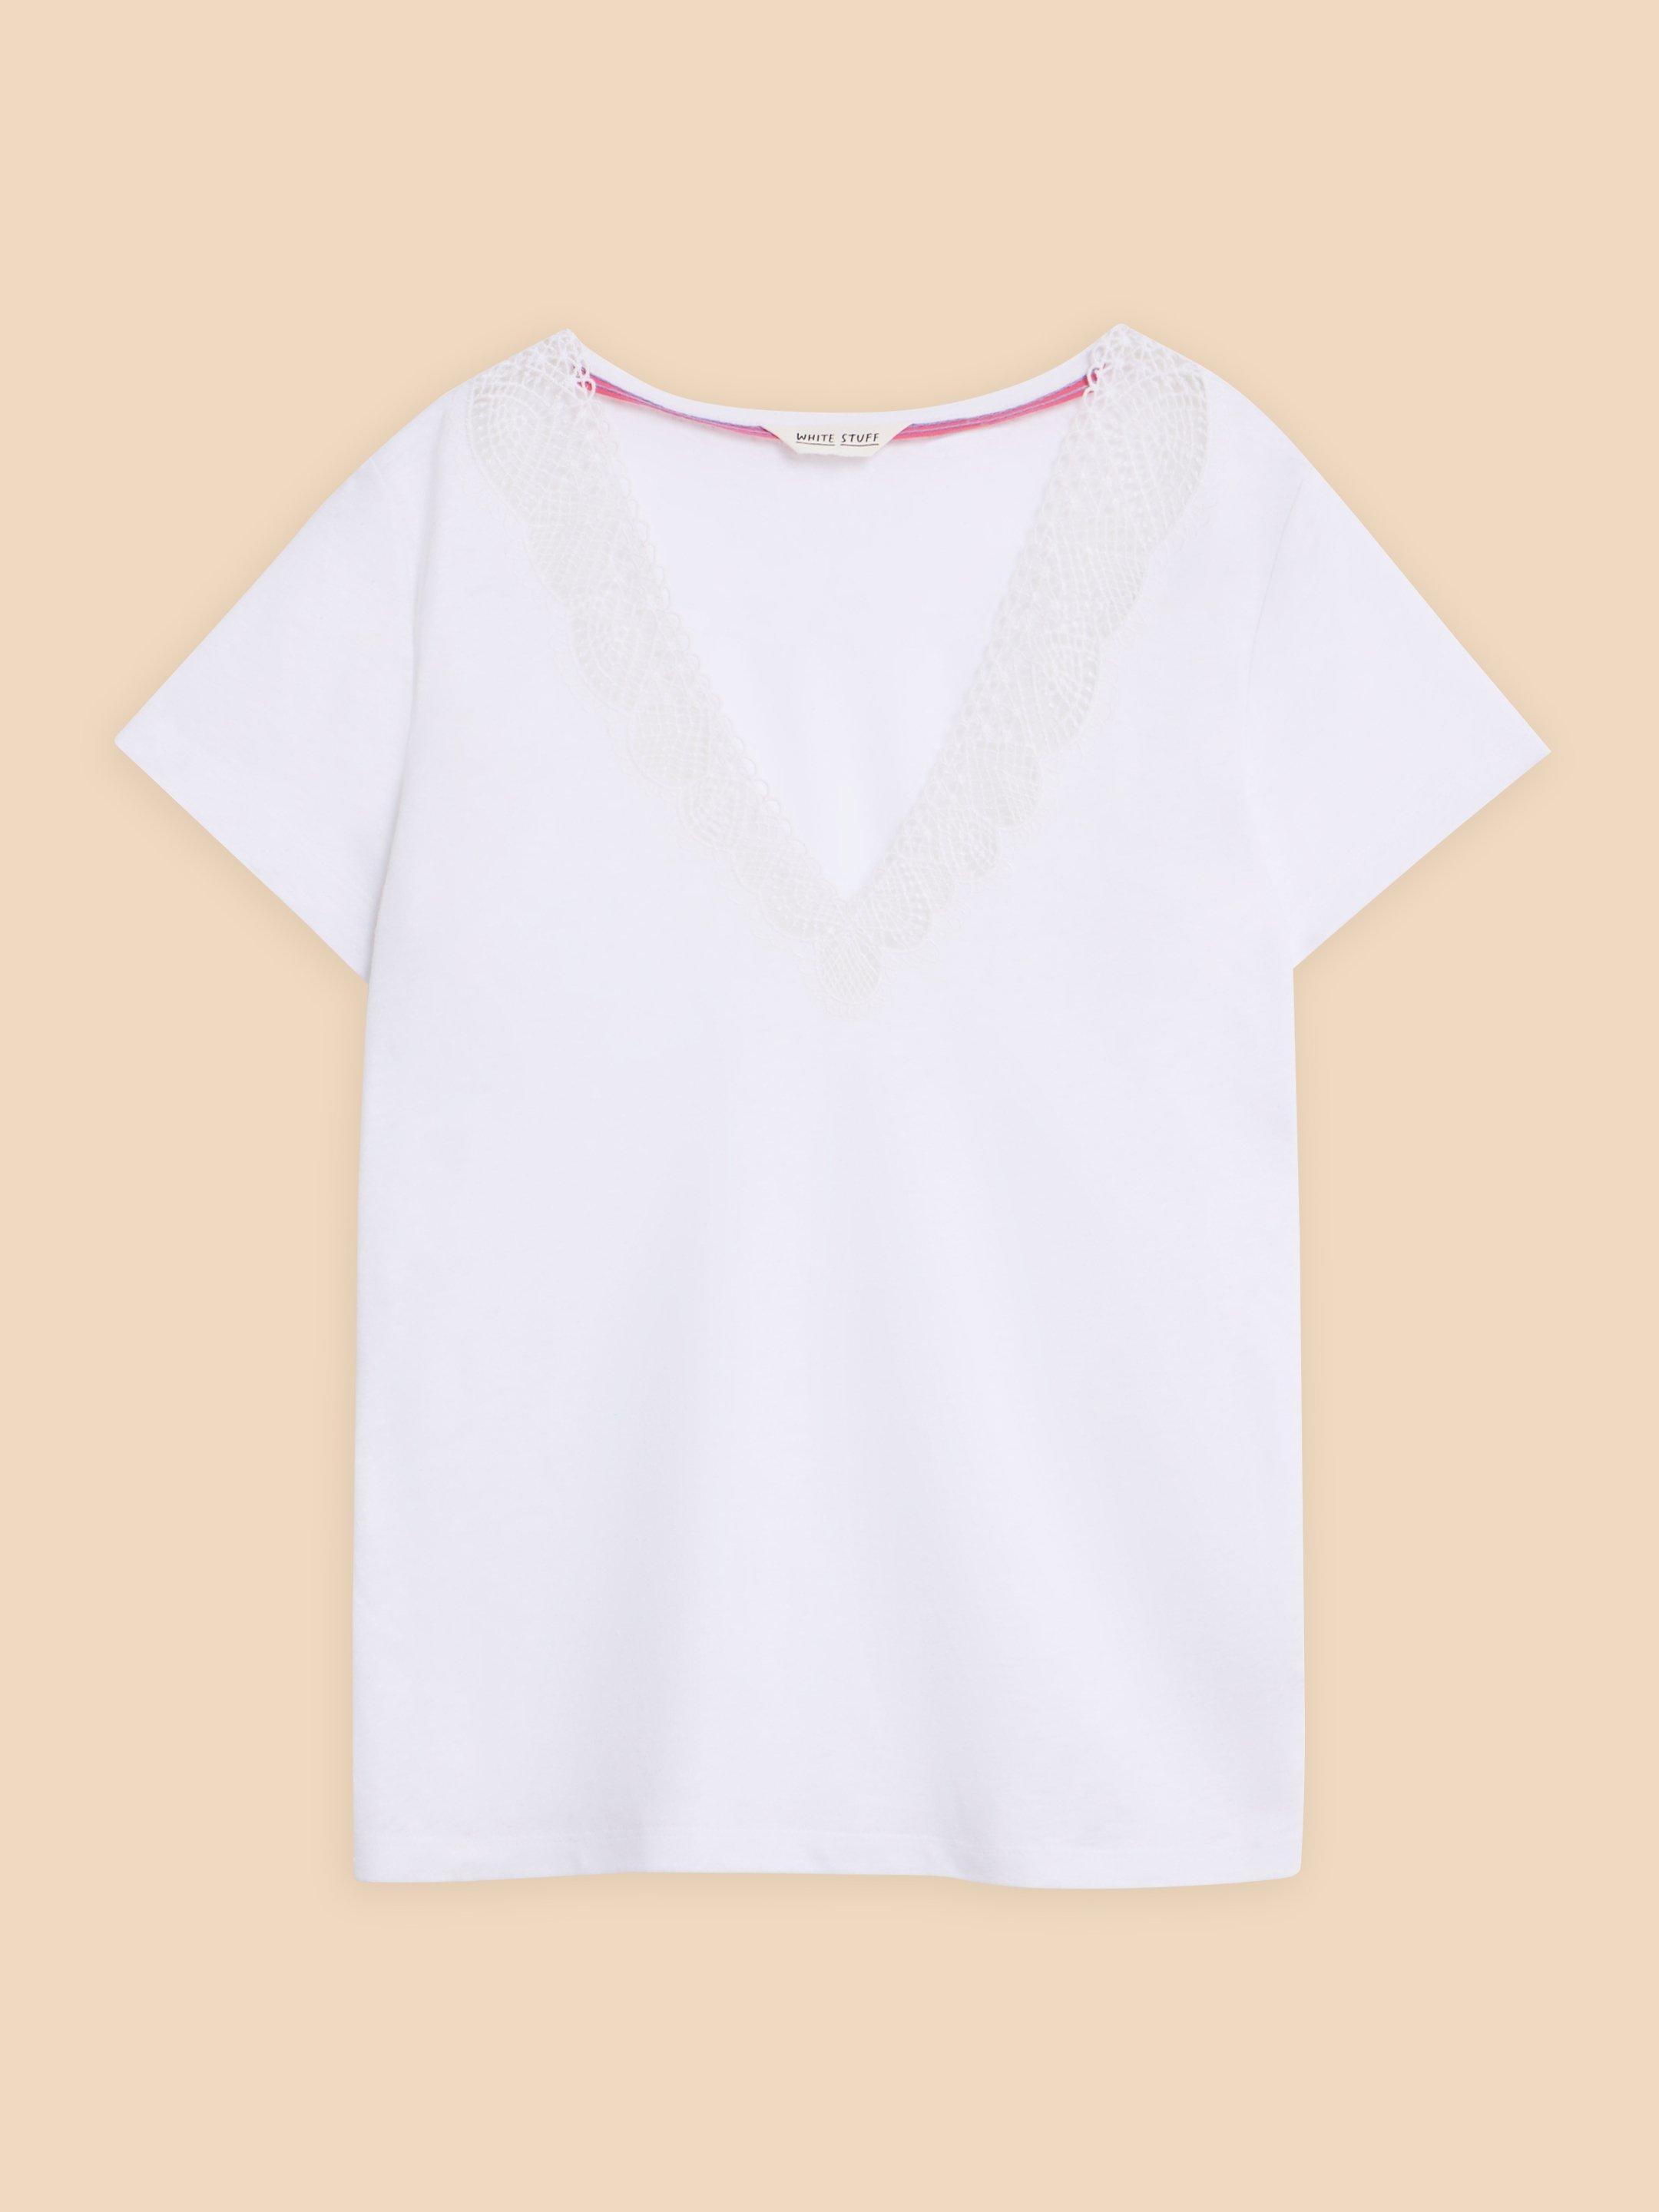 ELLIE LACE TEE in BRIL WHITE - FLAT FRONT